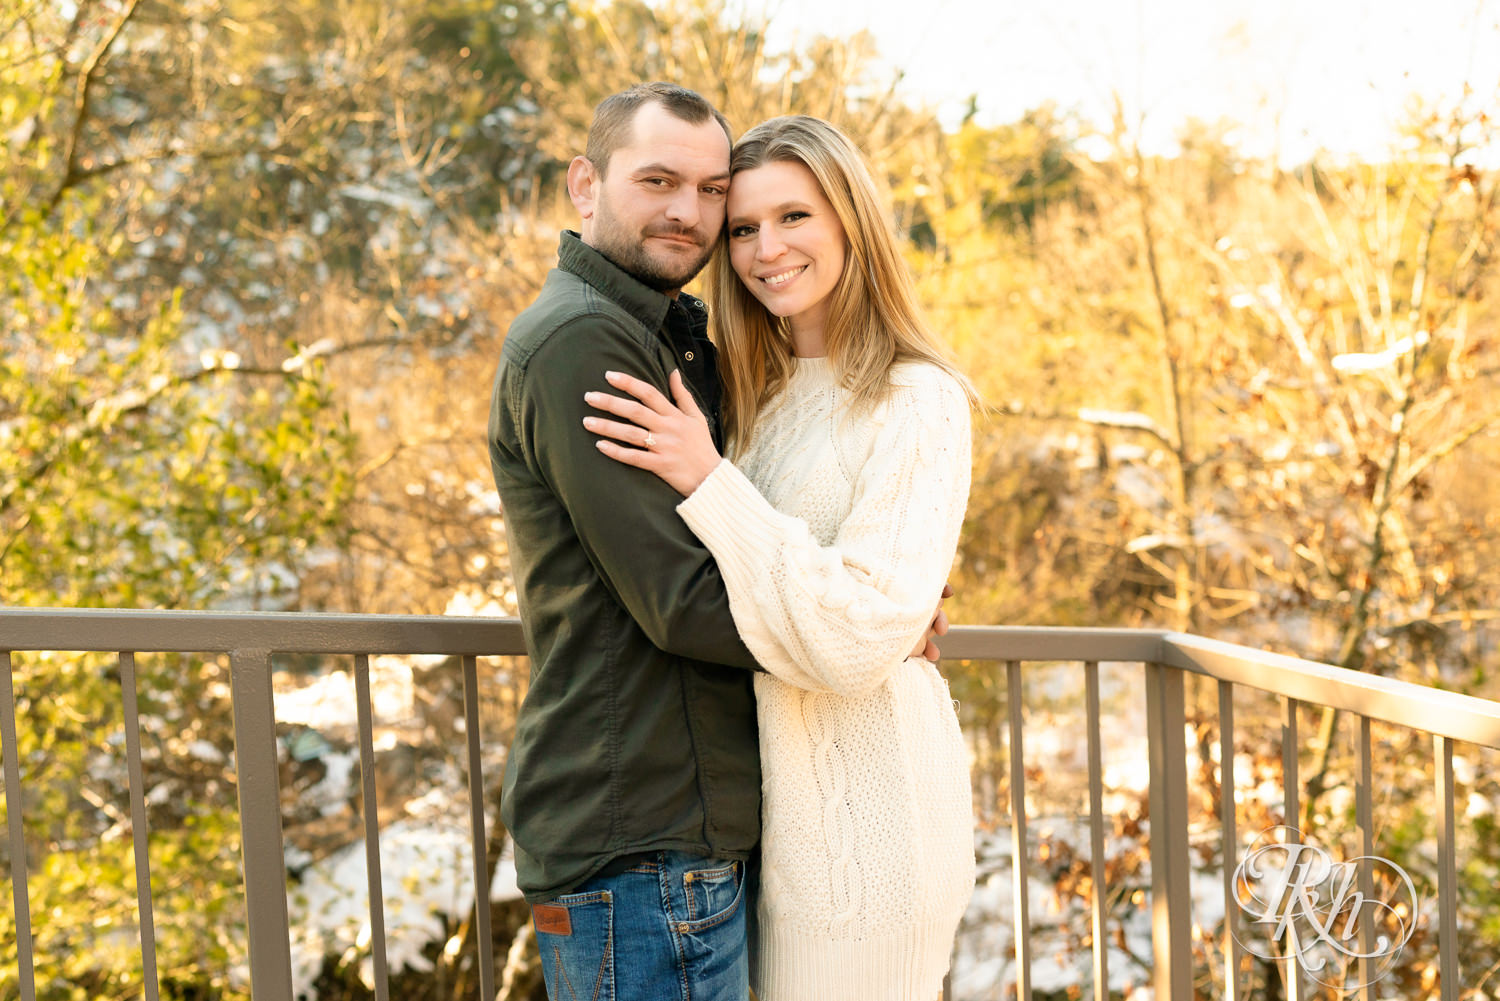 Man in jeans and green shirt and woman in a white sweater smile in the snow at sunrise during Taylor's Falls engagement photography session.